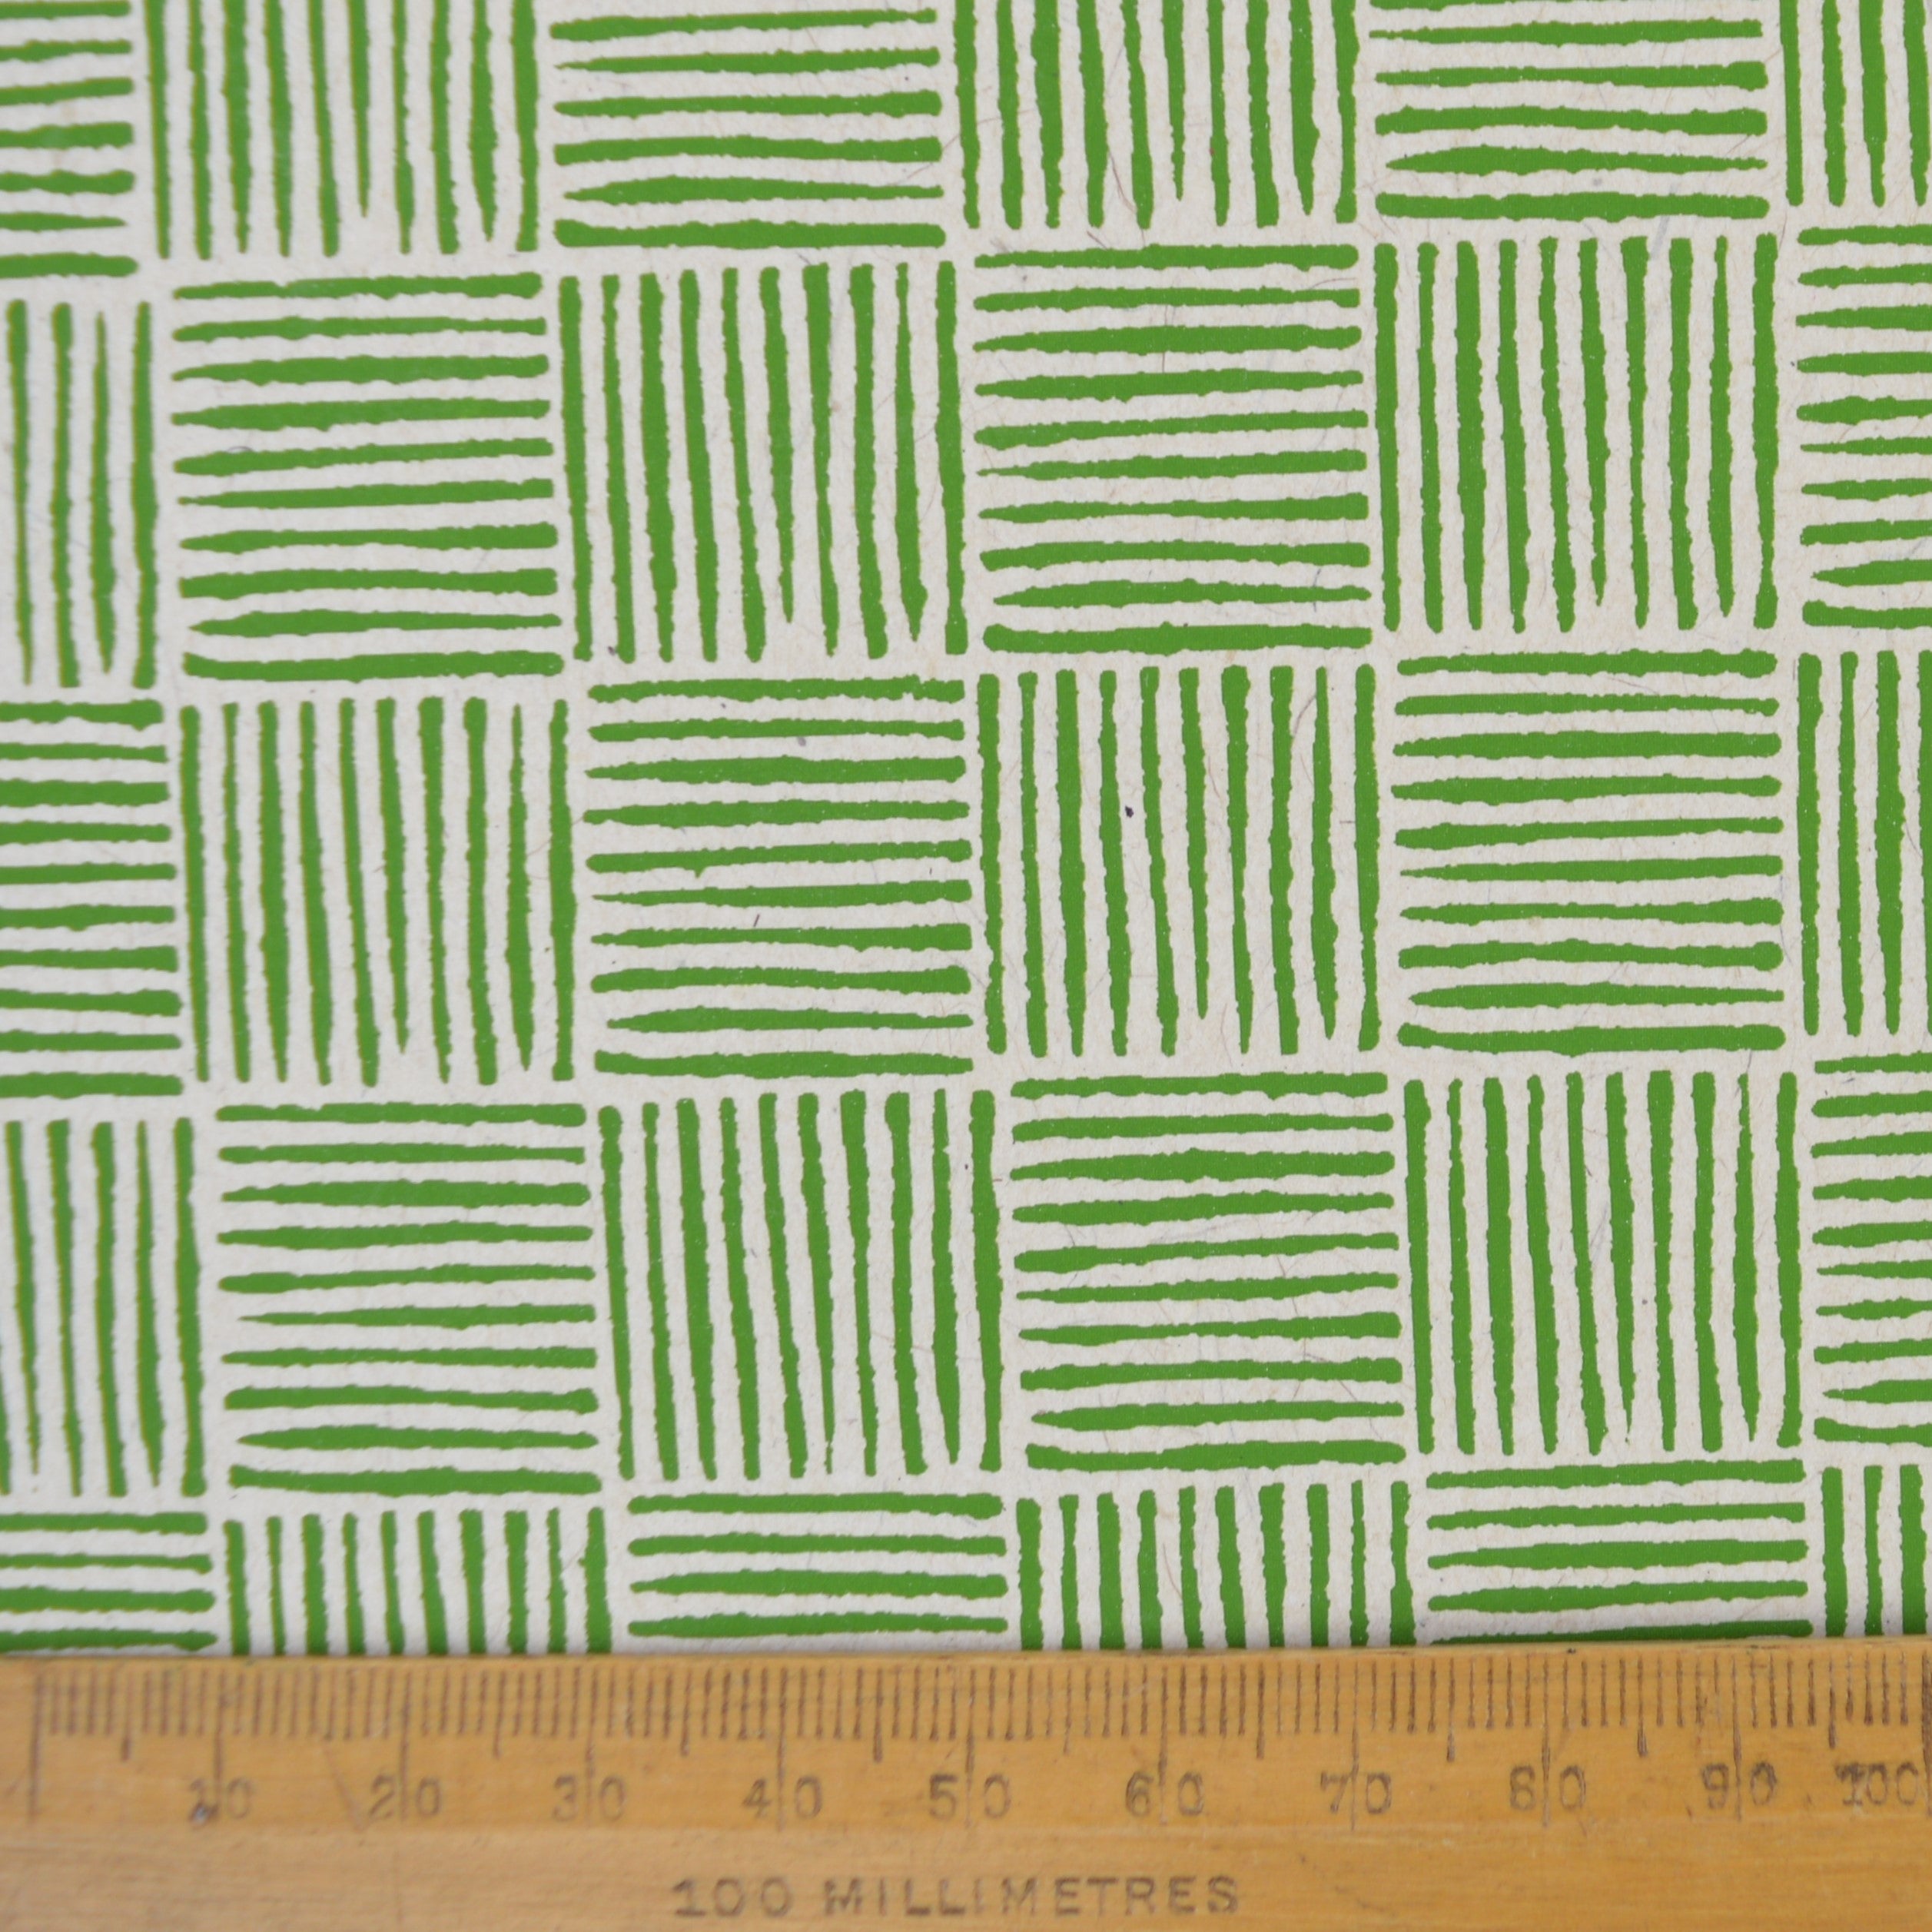 Munro and Kerr green hand printed paper for an empire lampshade